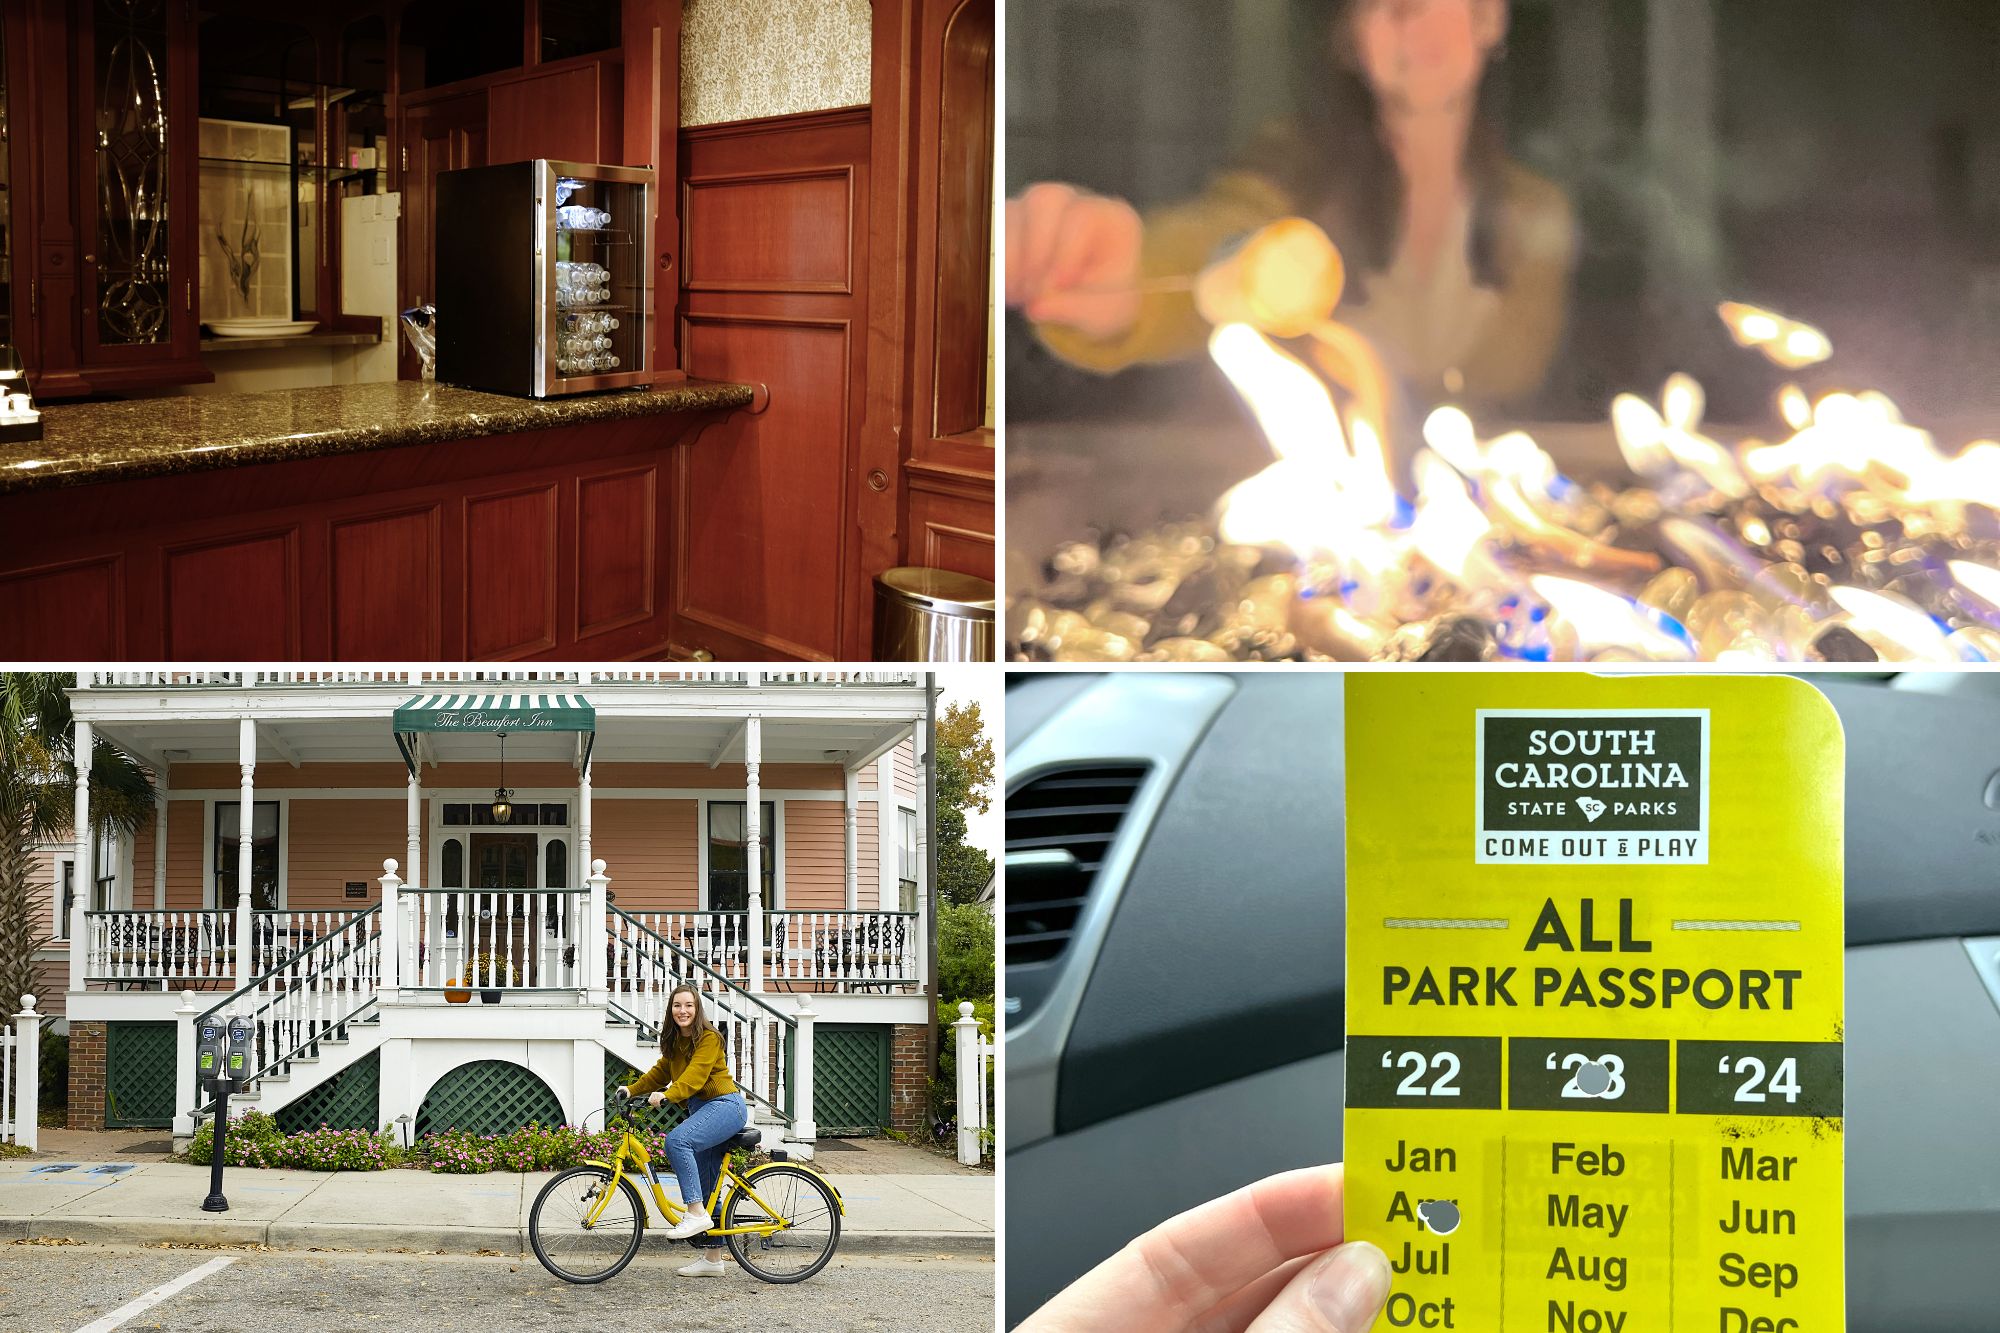 Amenities at The Beaufort Inn: Free water, firepit and smores, free bikes, and park pass